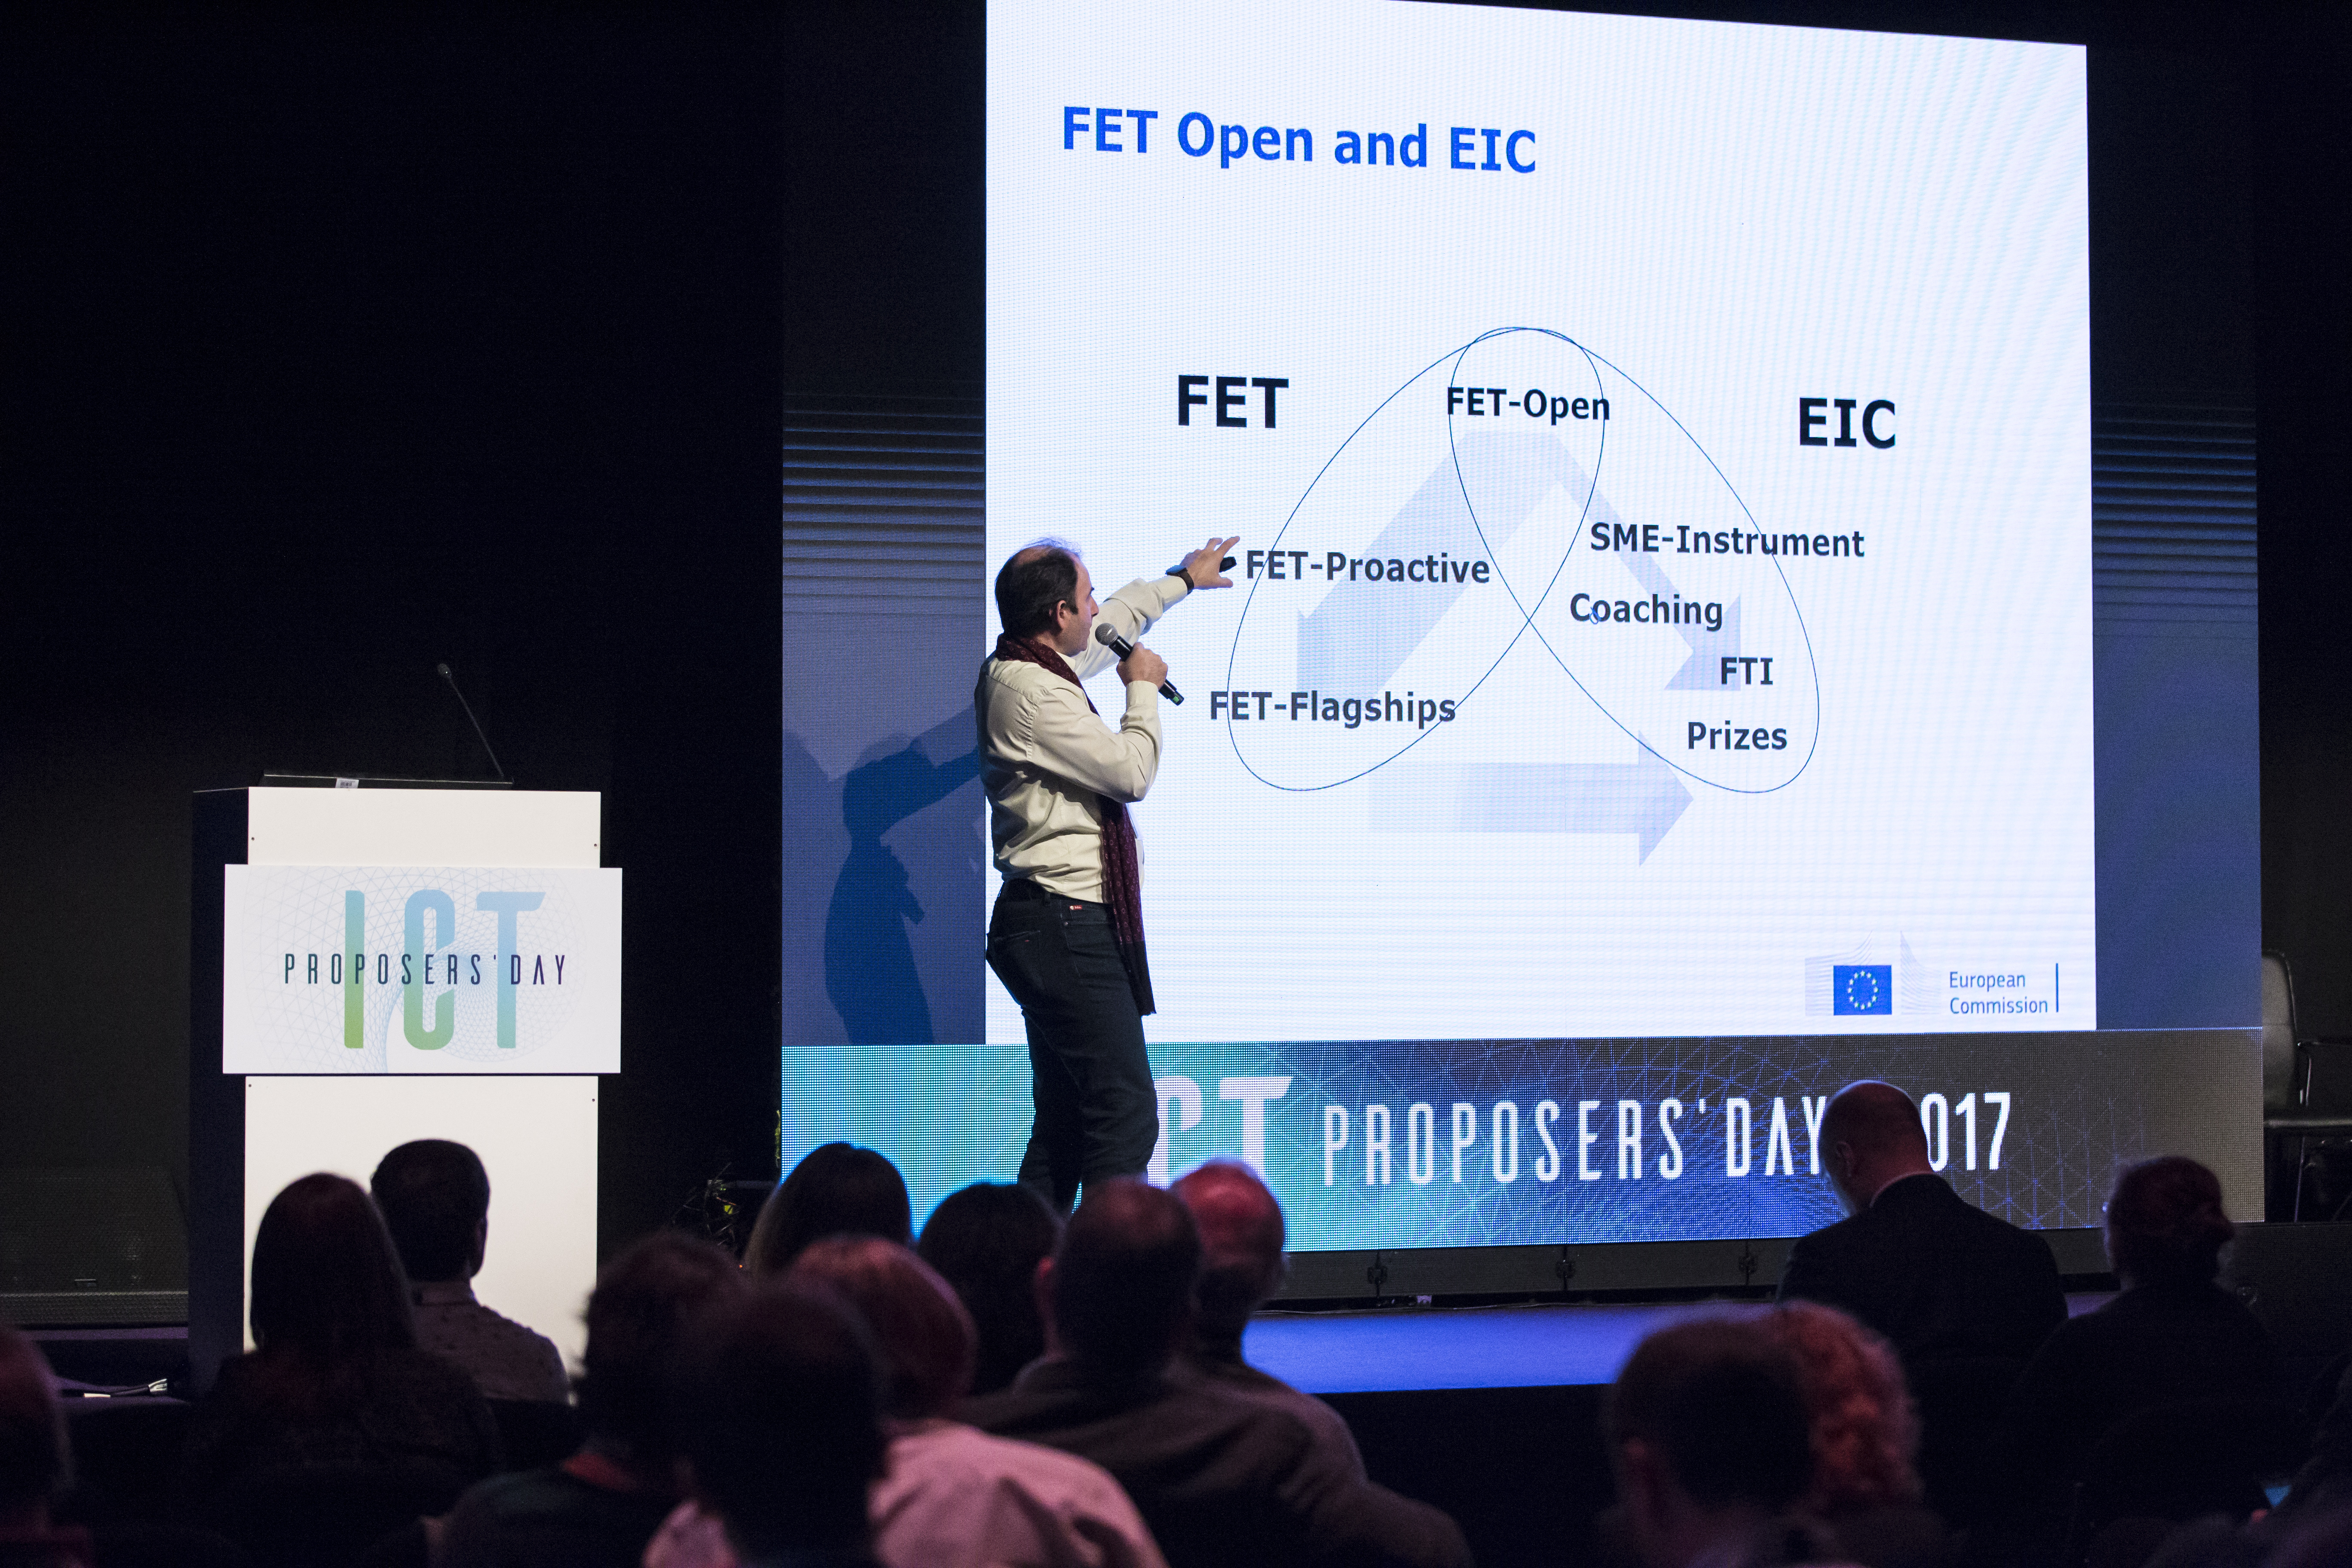 Case study – ICT Proposers’ Day 2017